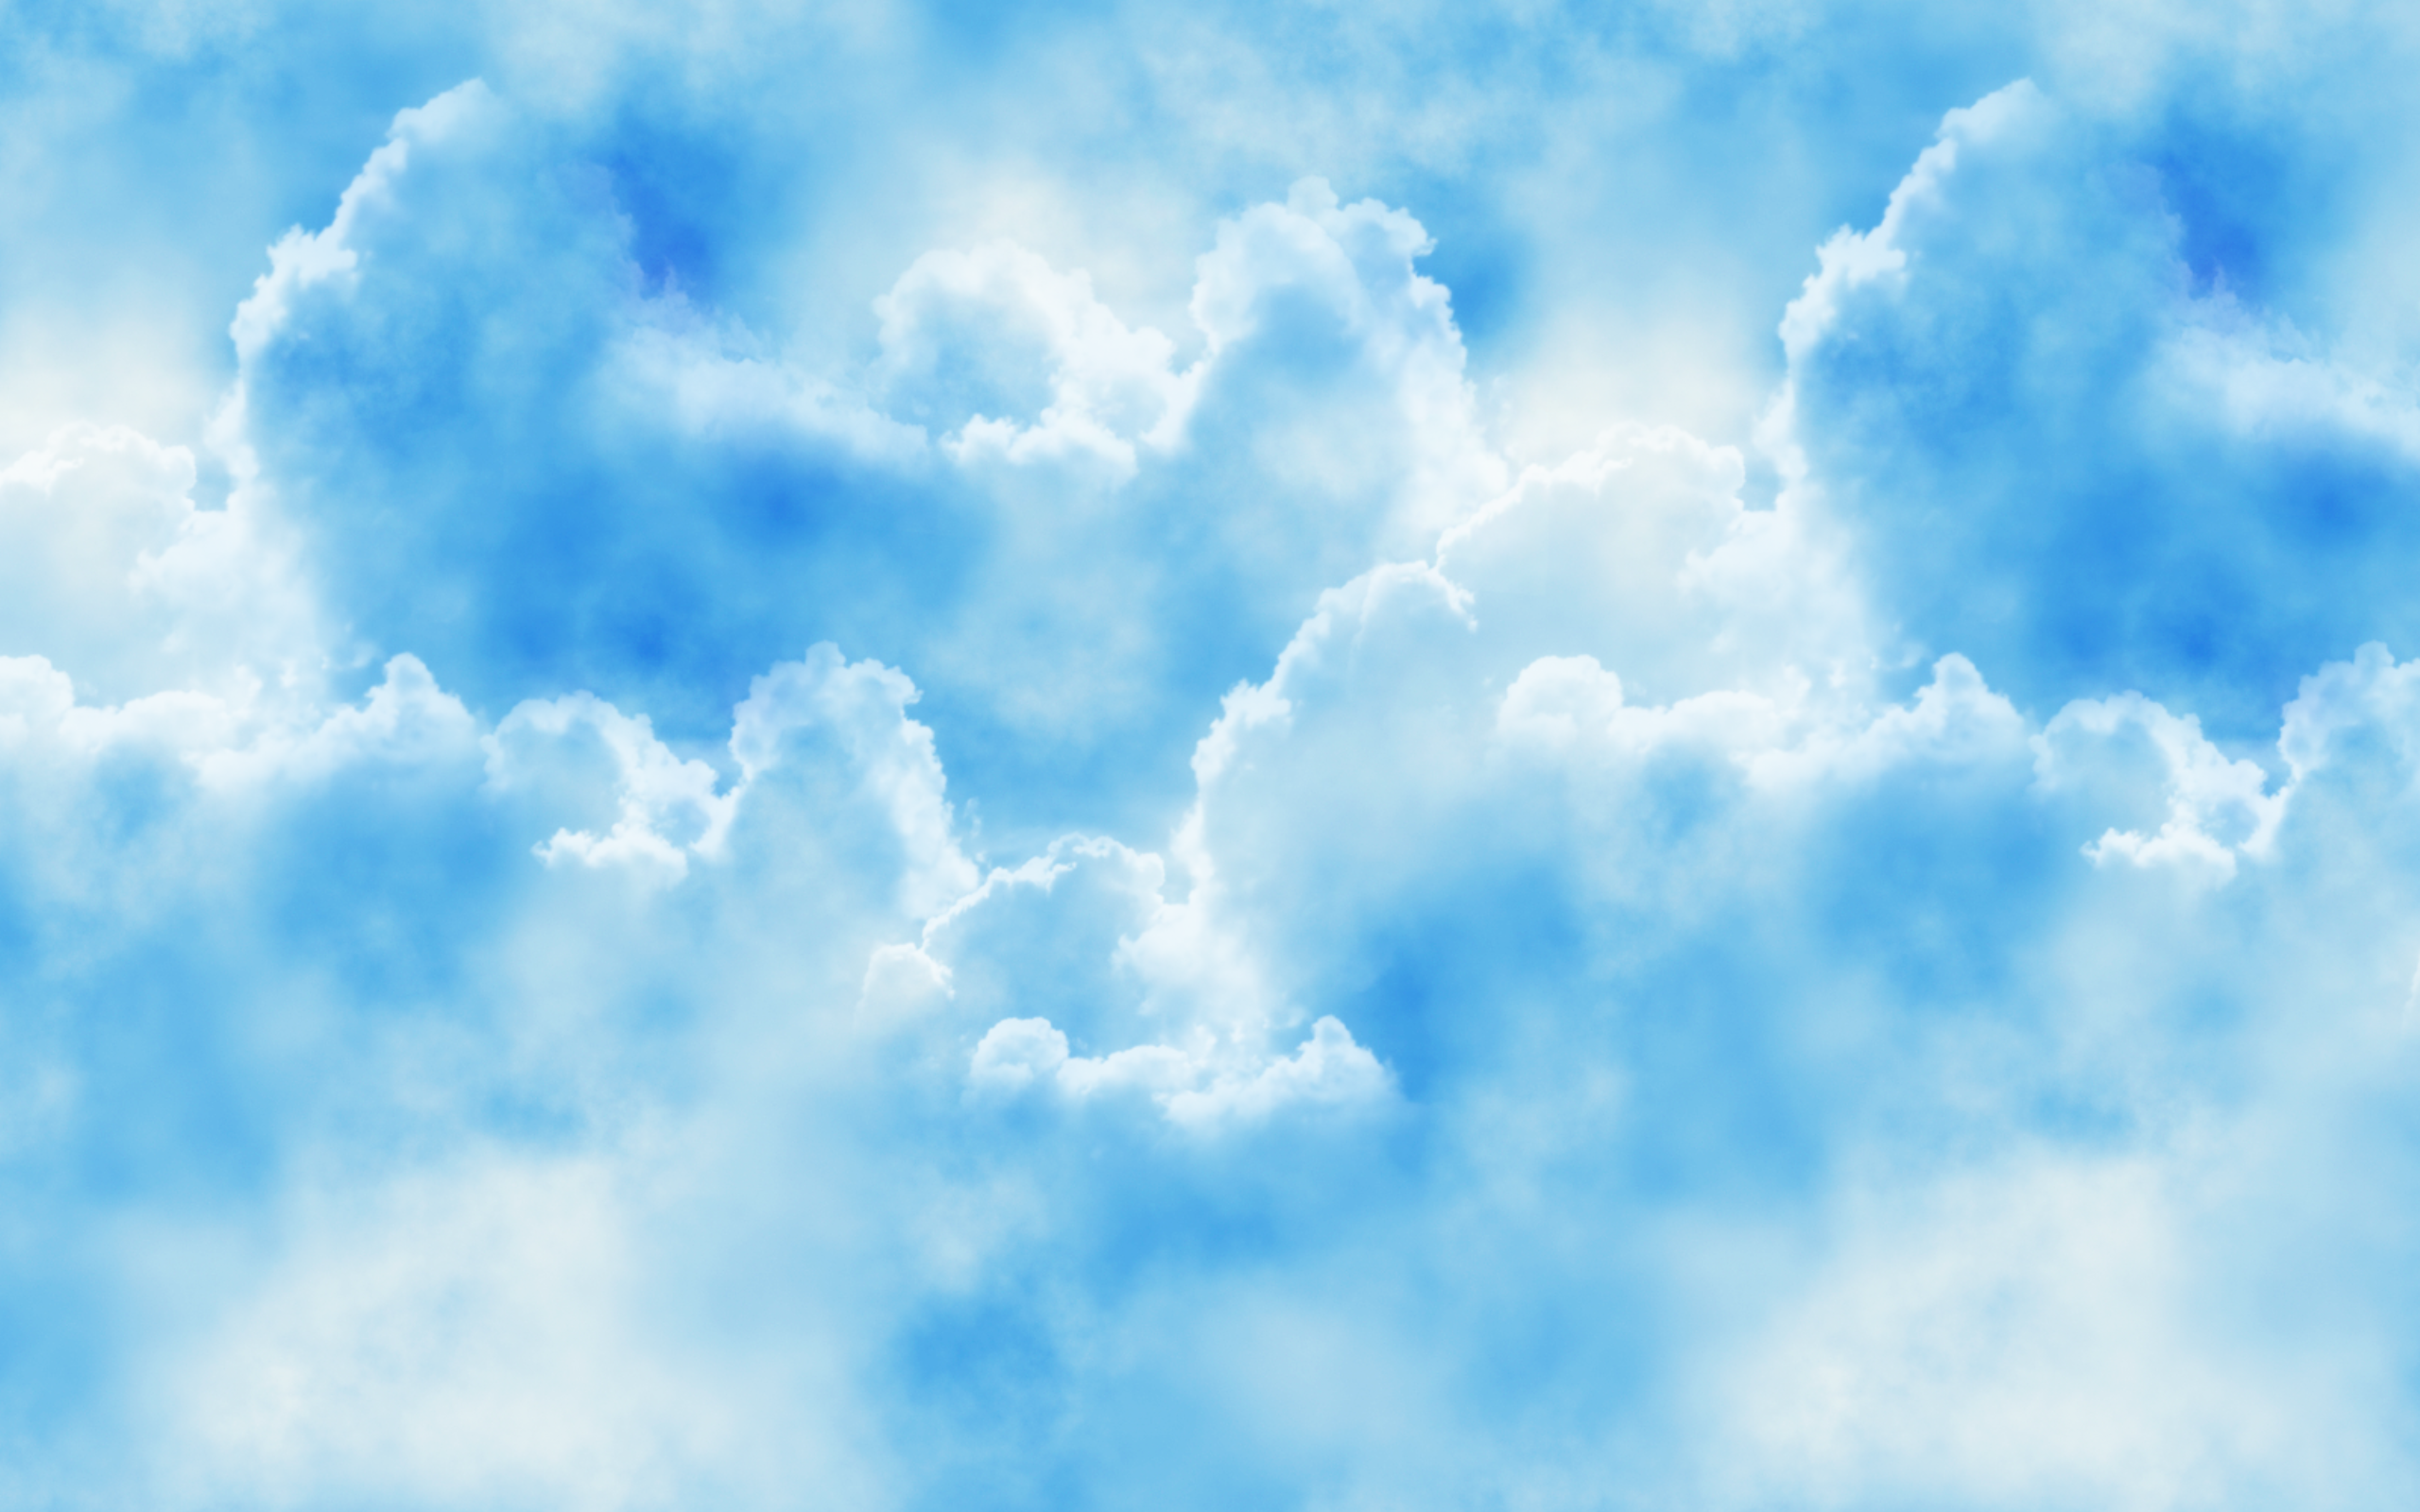 chicken nuggets sky backgrounds 2560x1600